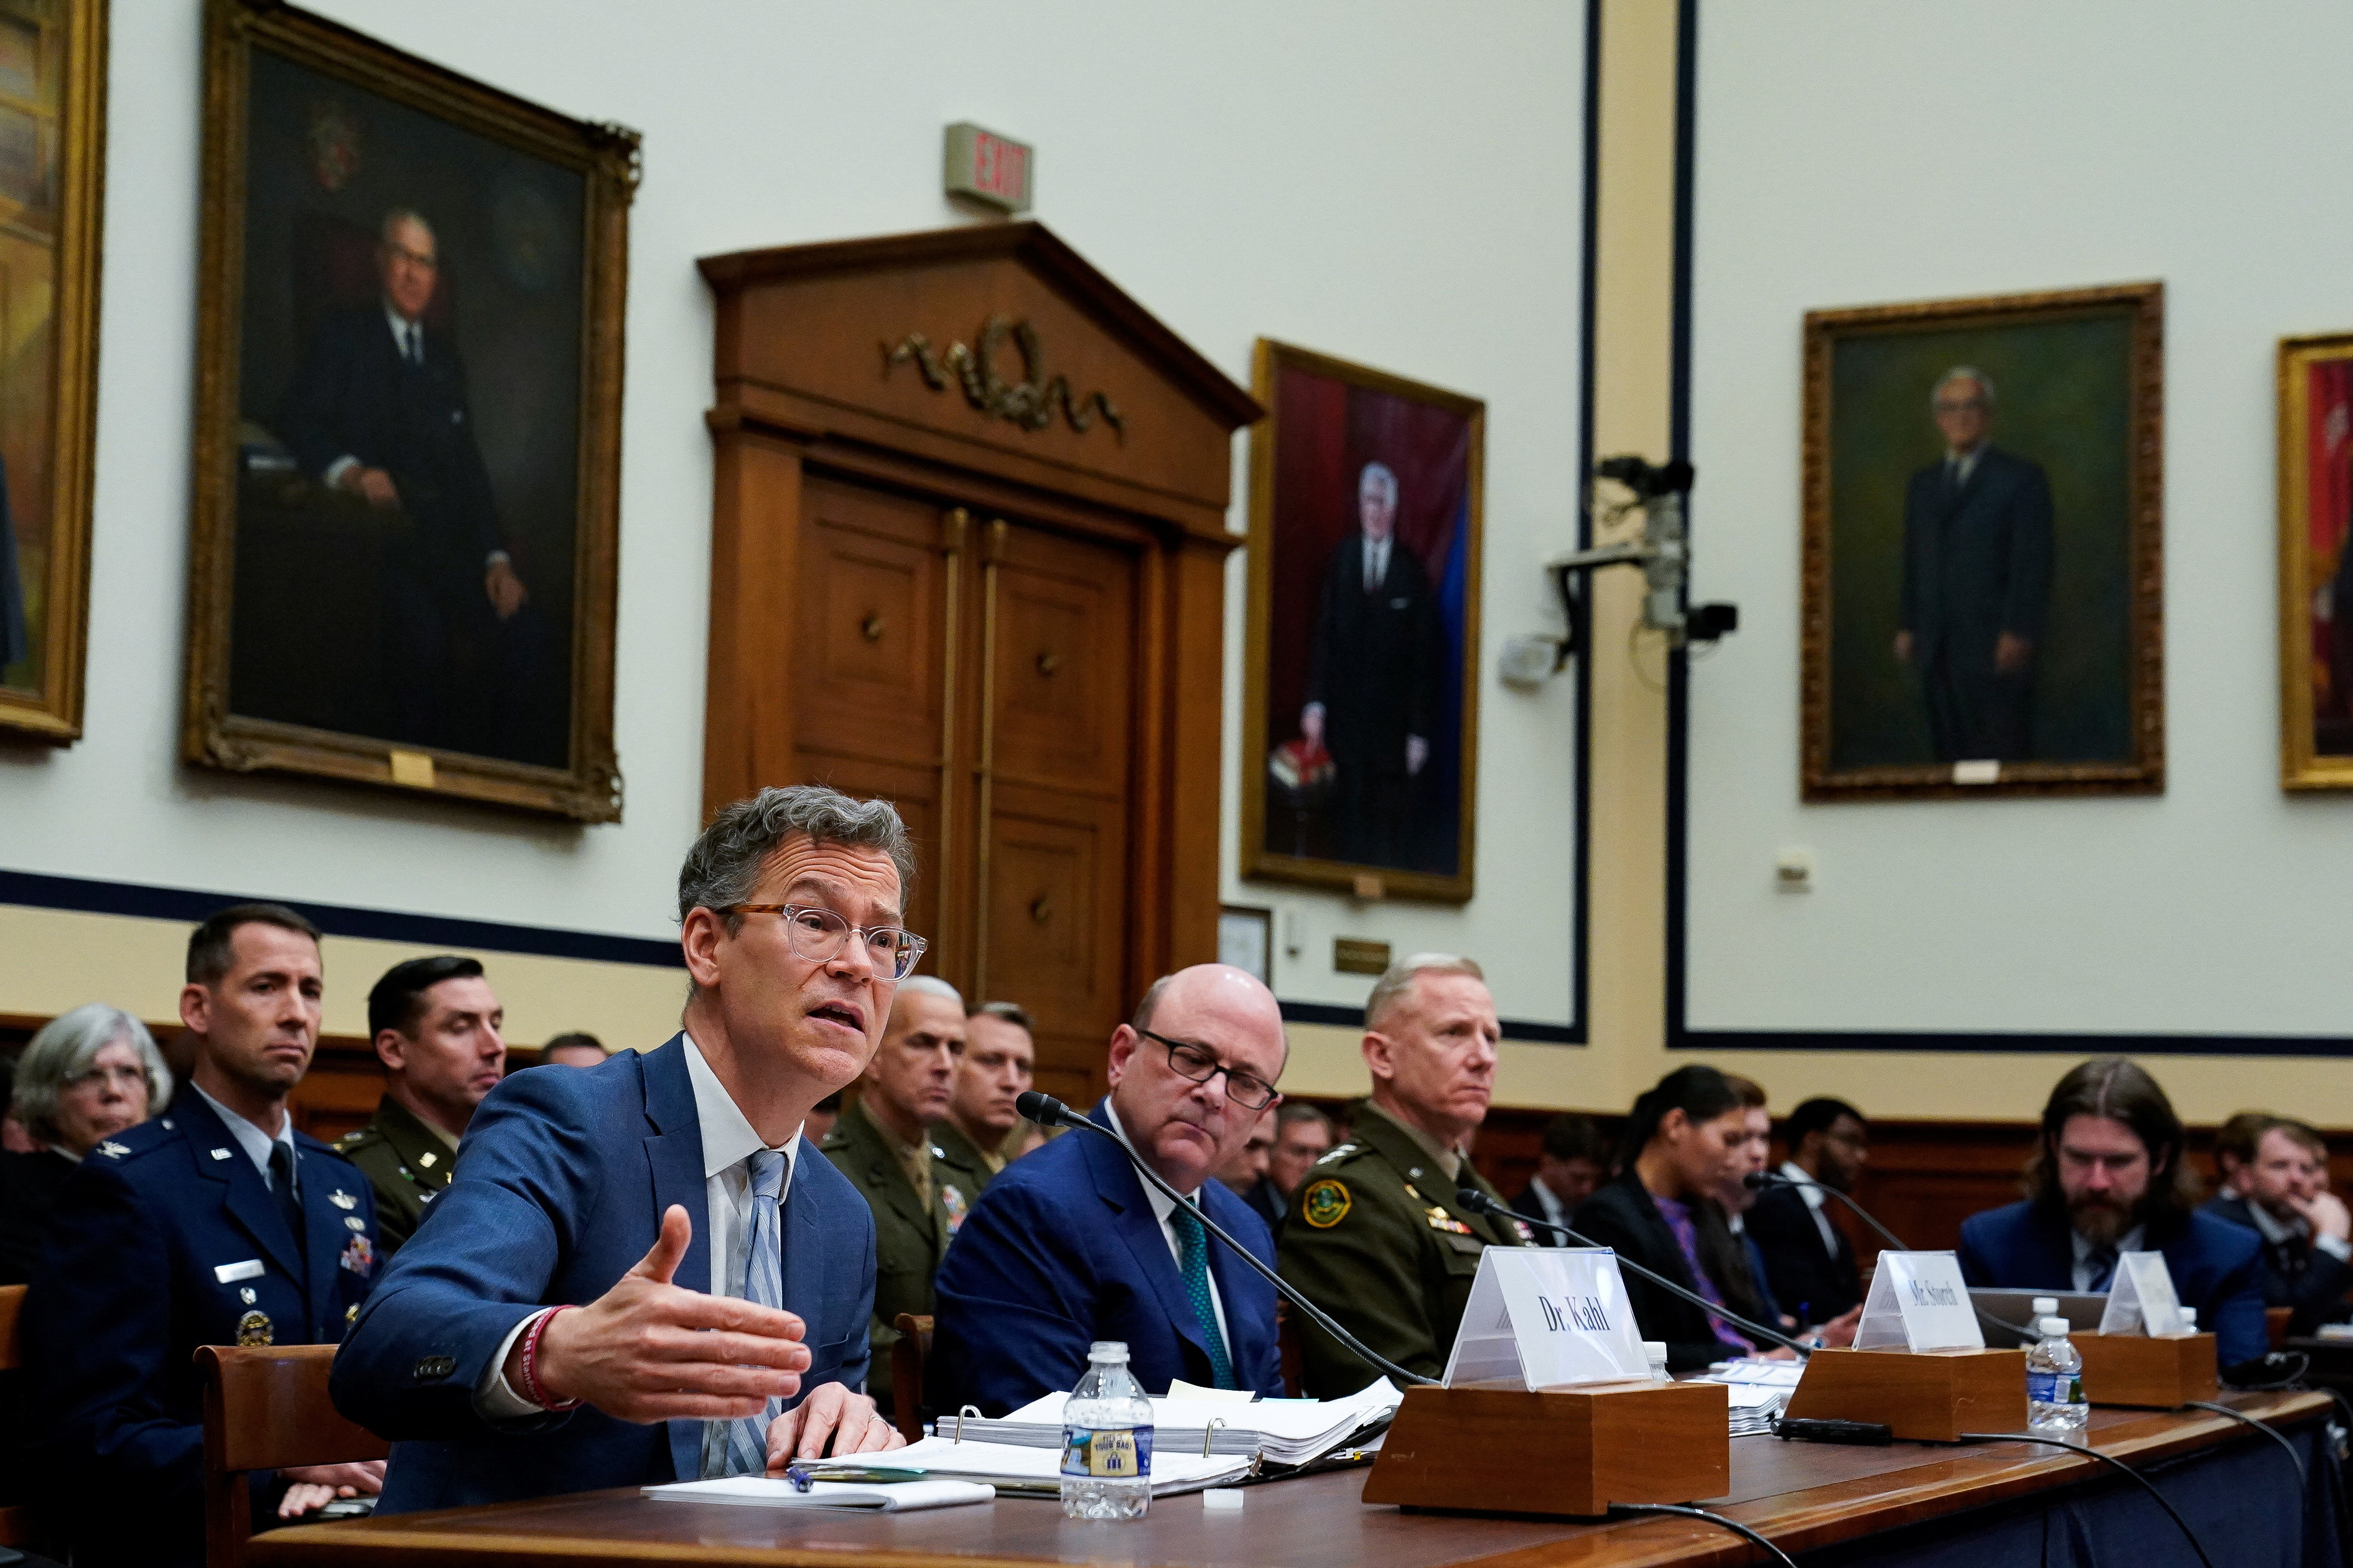 House Armed Services Committee hearing on oversight of U.S. military support to Ukraine